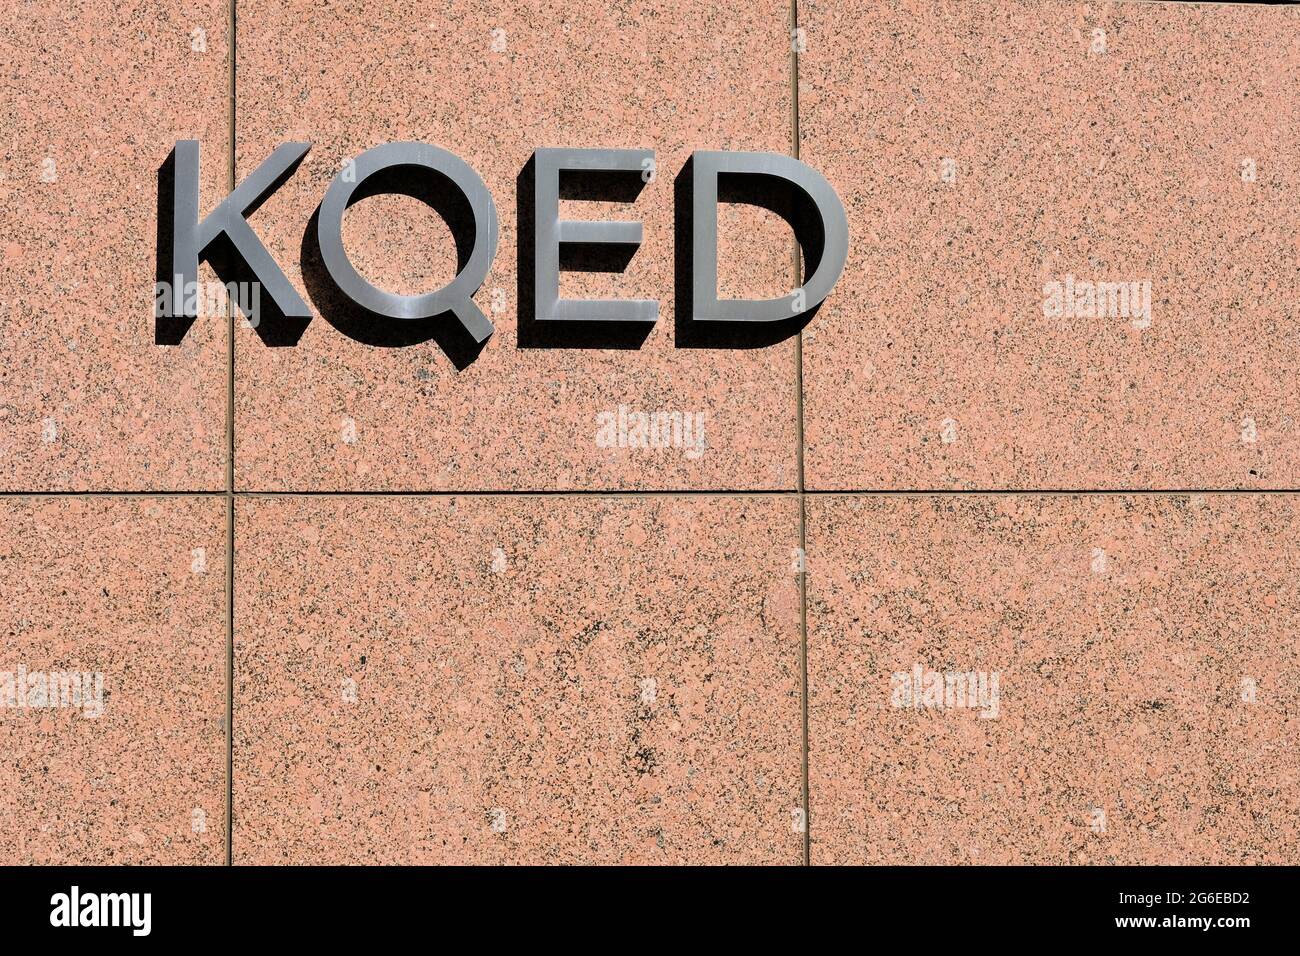 Radio and television station letters on a wall at the entrance to the KQED  building at 50 West San Fernando Street, in downtown San Jose, California  Stock Photo - Alamy